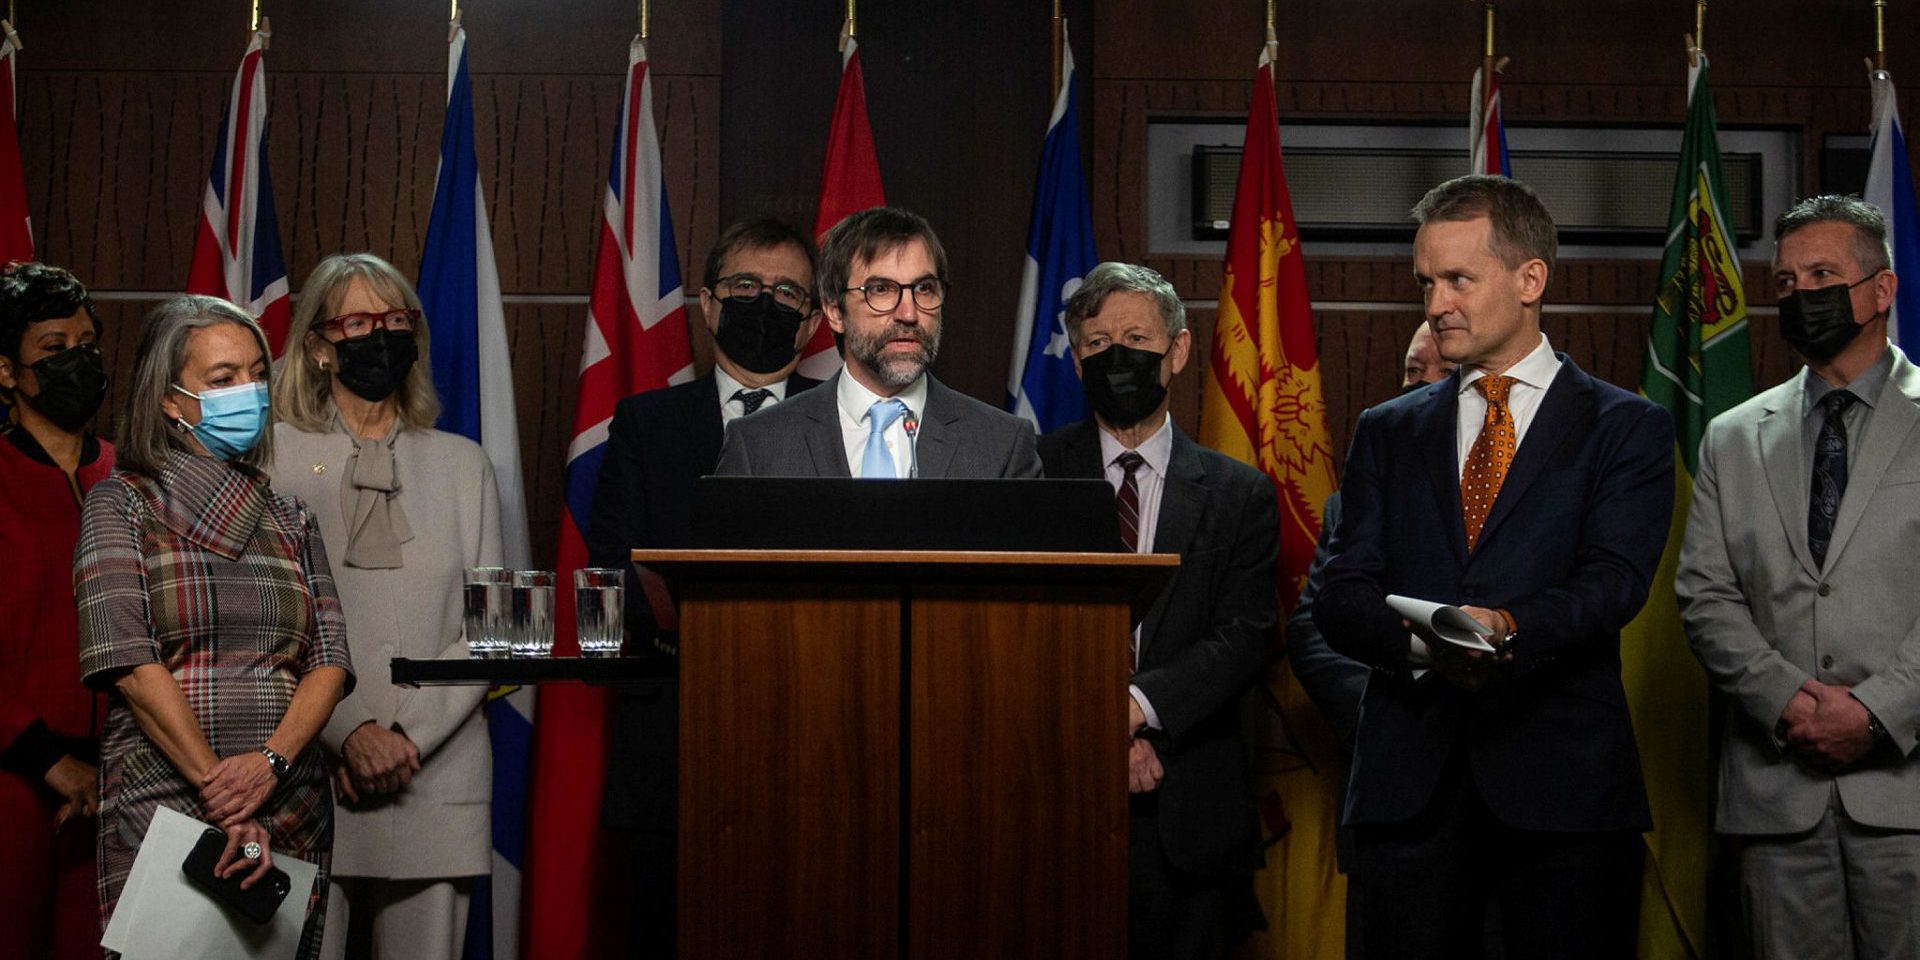 Steven Guilbeault, Minister of Environment and Climate Change, alongside the Honourable Seamus O'Regan Jr., Minister of Labour, hold a press conference in West Block on  Nov. 22, {iptcyear4, to outline the federal carbon pollution pricing systems. The Hill Times photograph by Andrew Meade